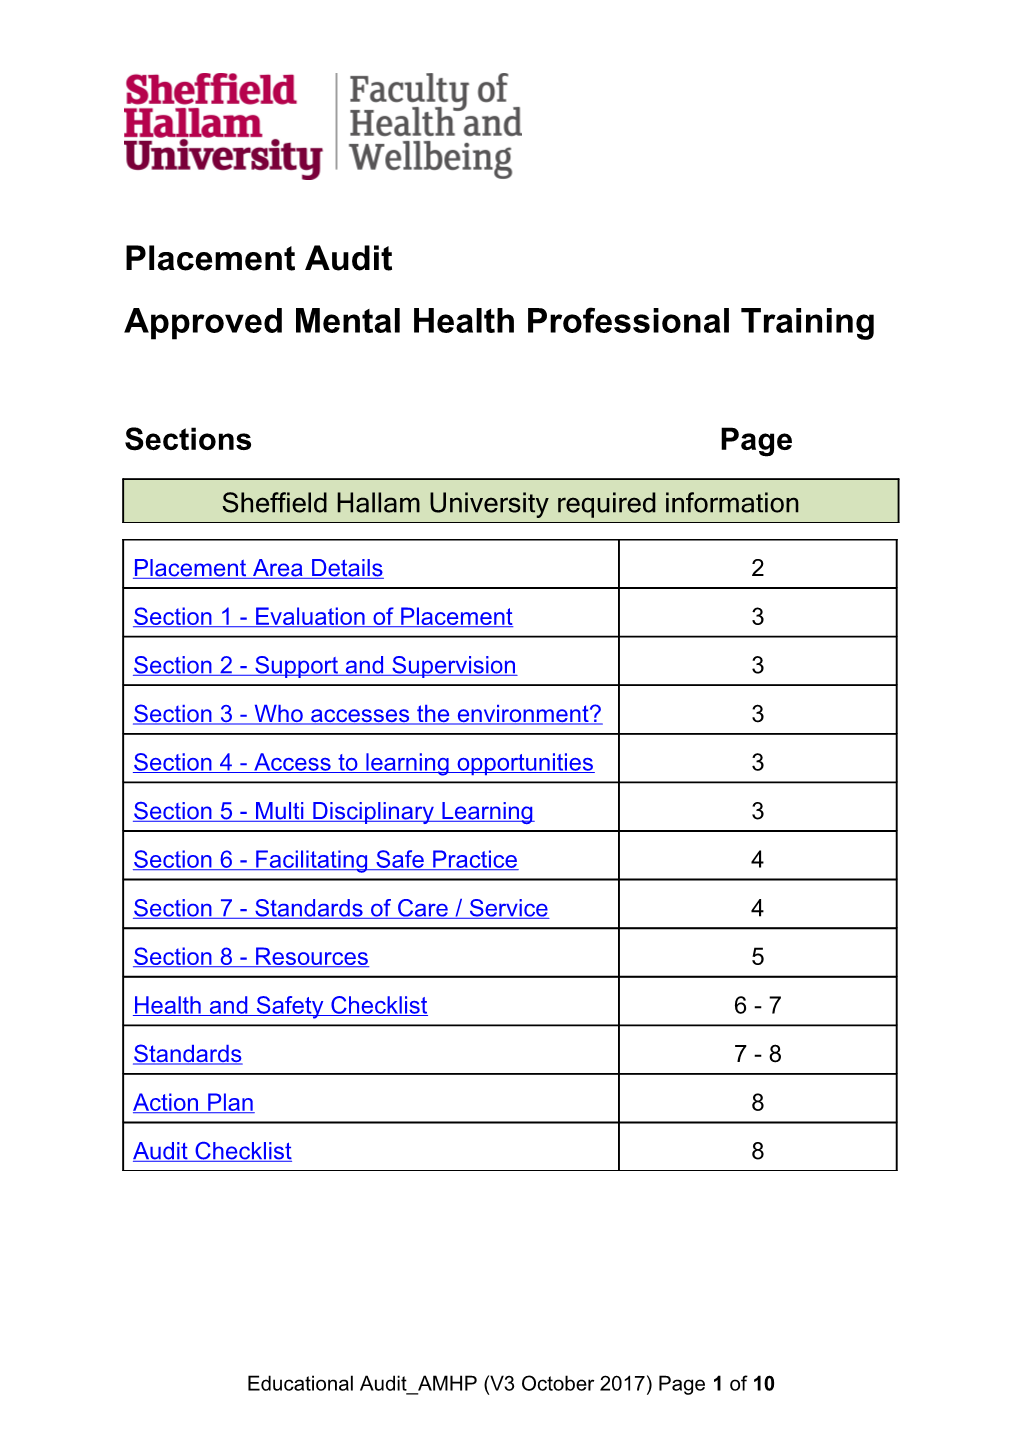 Approved Mental Health Professional Training